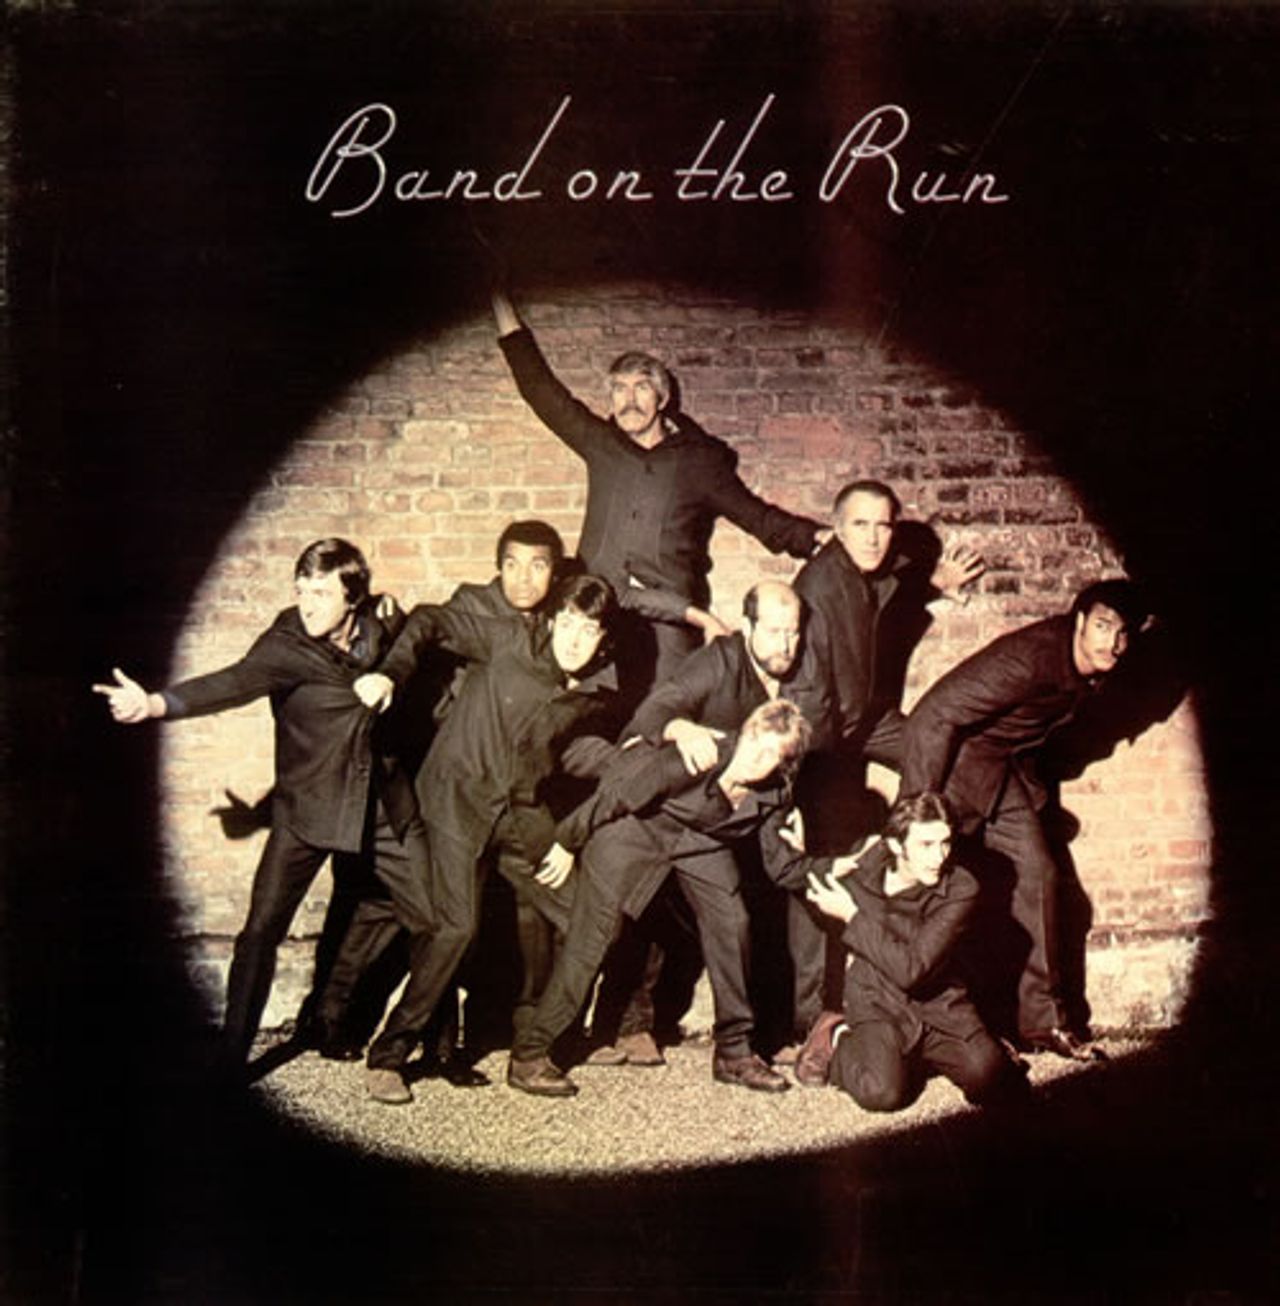 Paul McCartney and Wings Band On The Run - 2nd - Complete UK Vinyl 